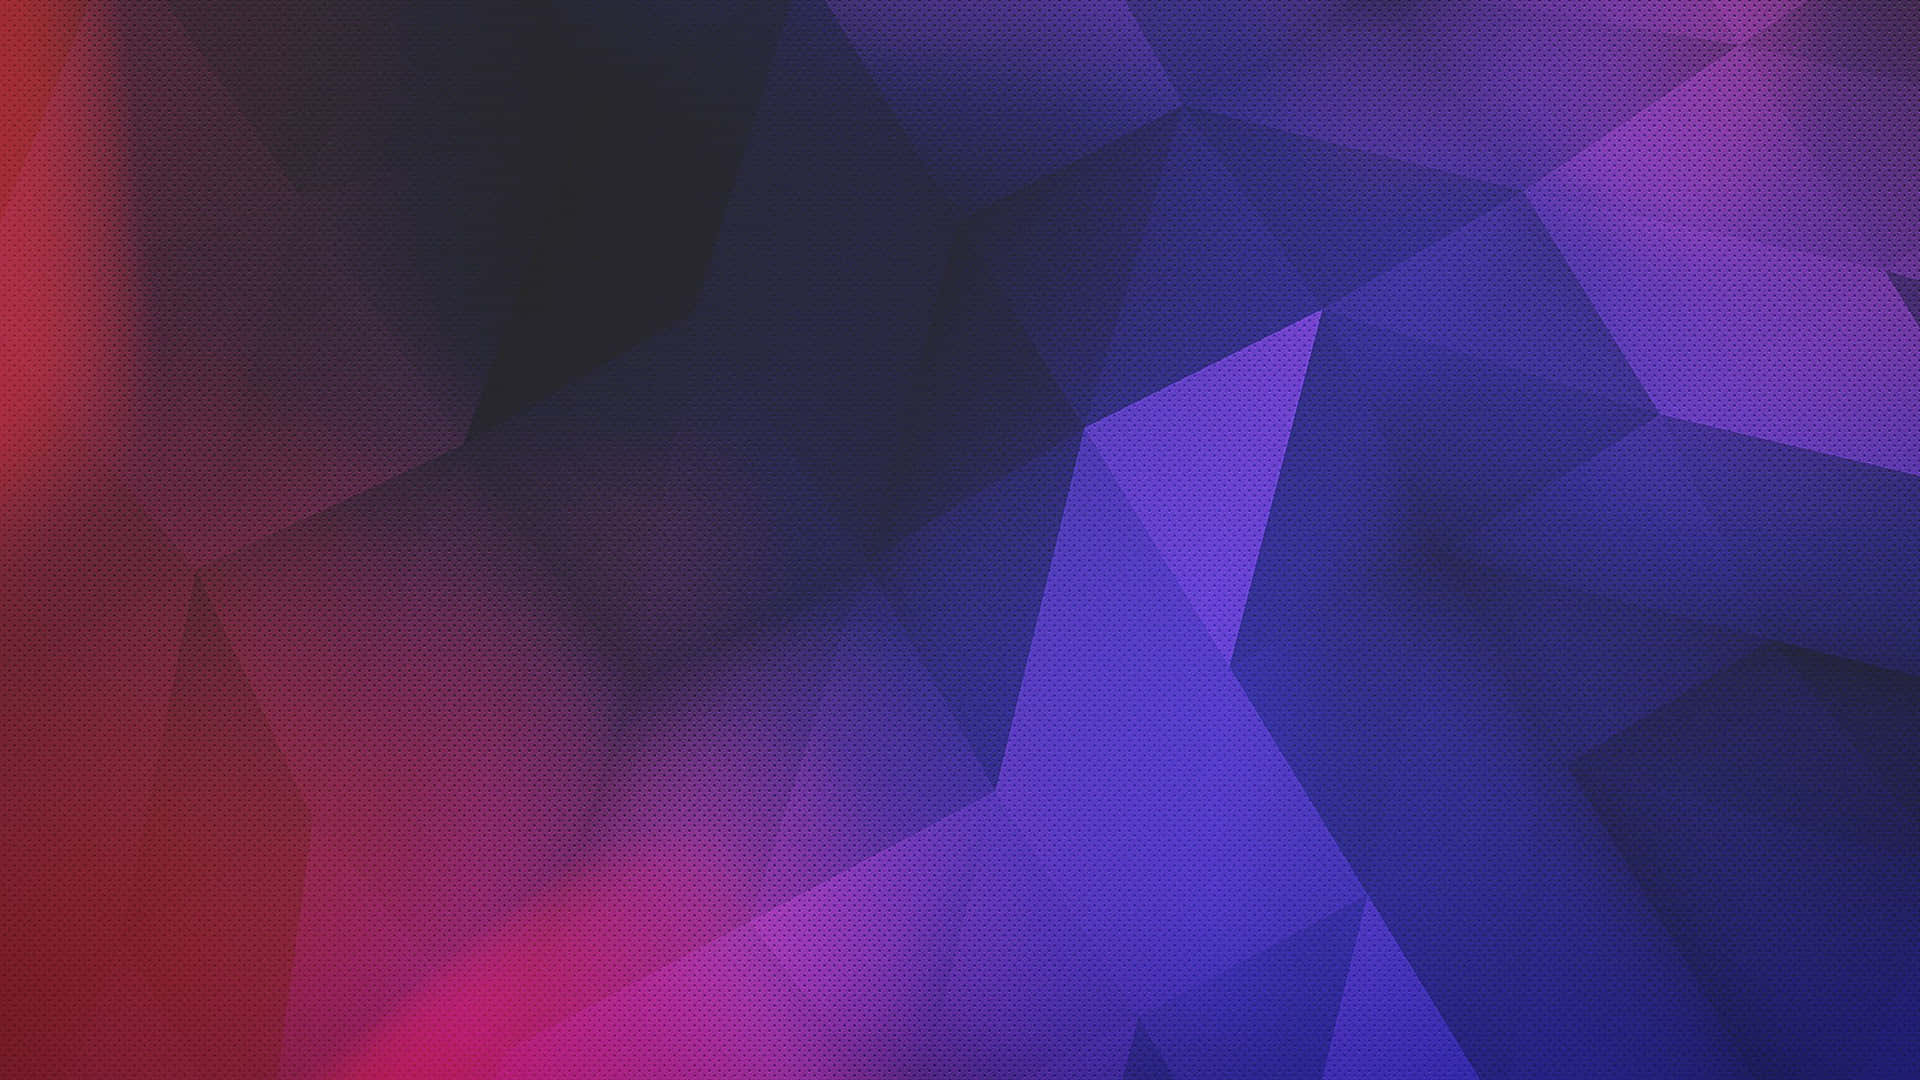 "A Colorful Display of Blue and Purple" Wallpaper